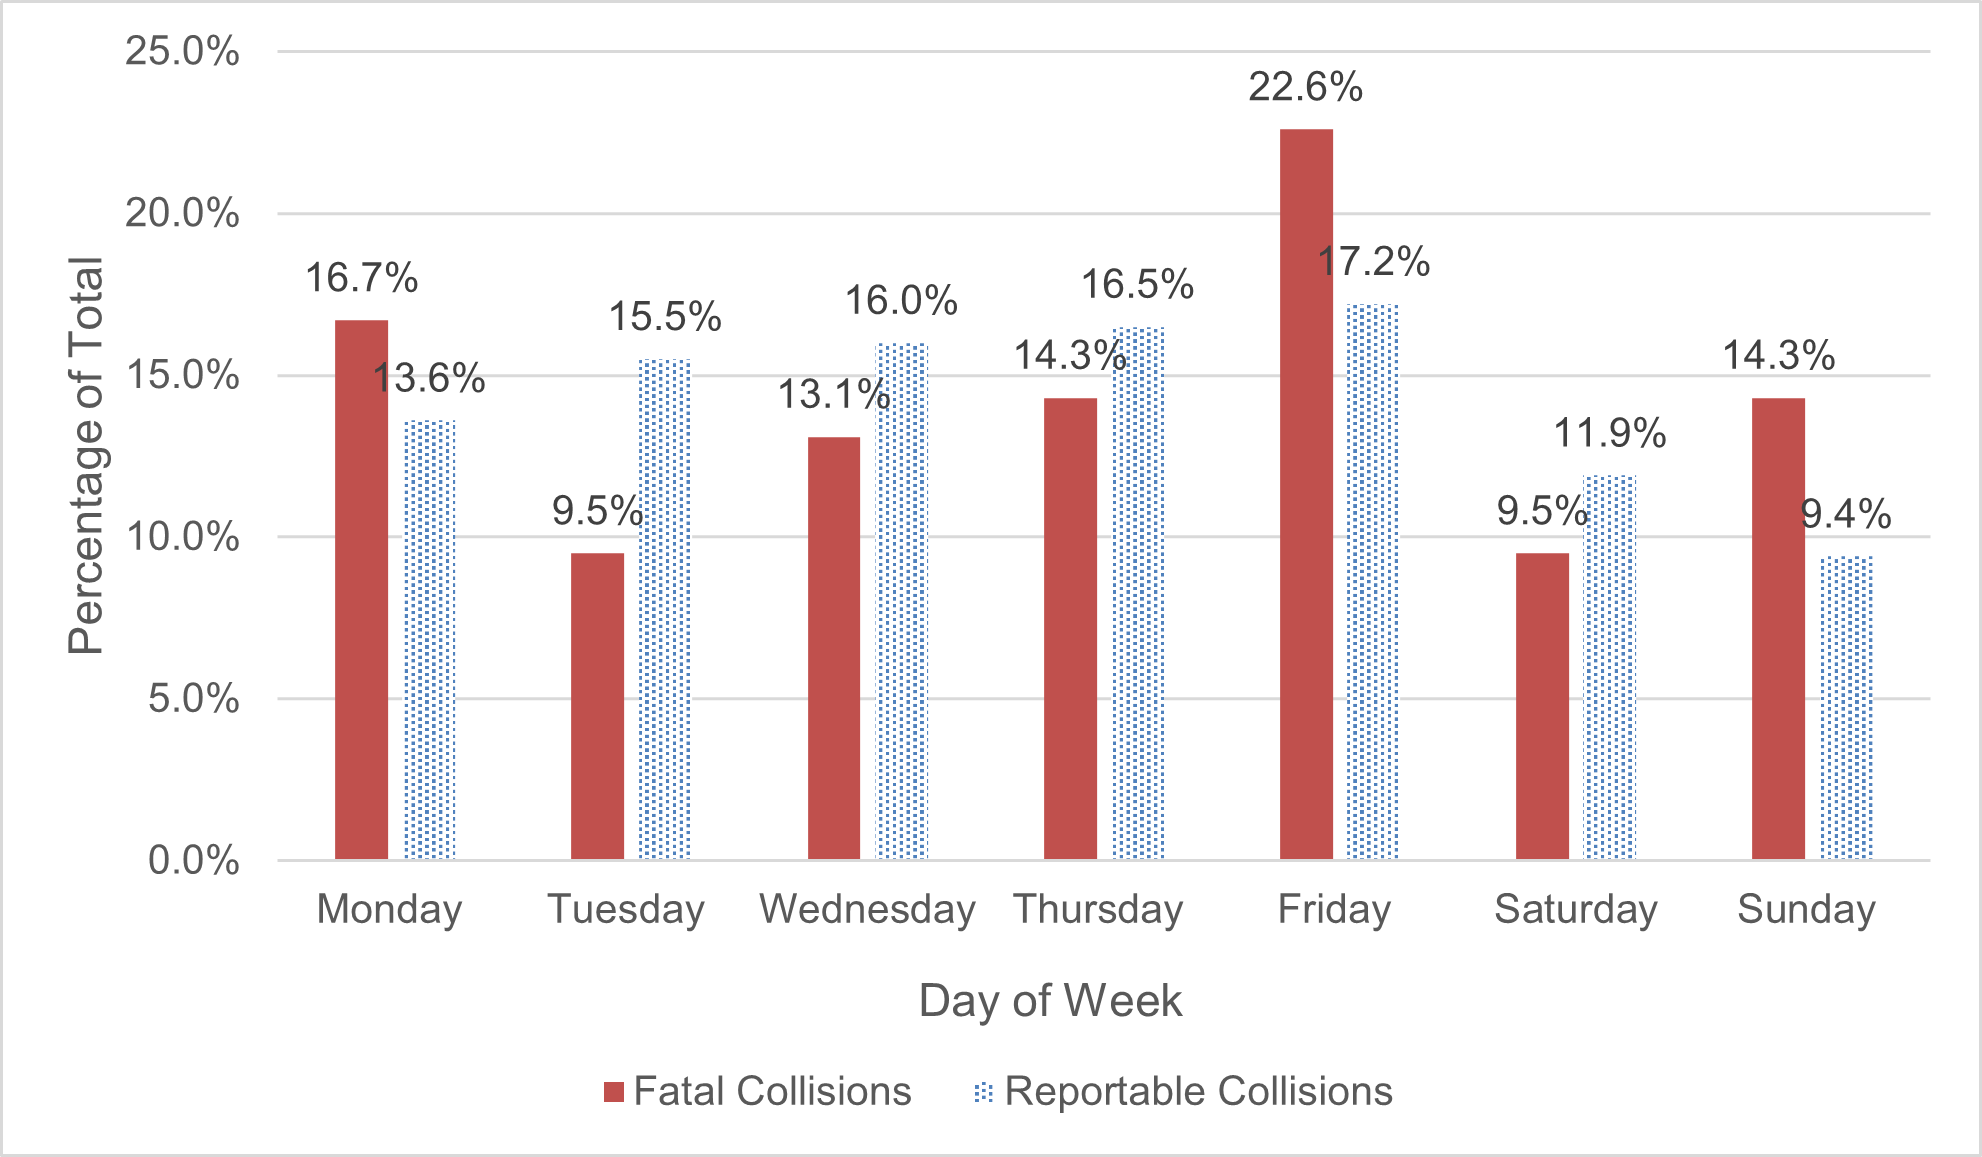 Figure Seven demonstrates the number of fatal collisions versus reportable collisions by day of the week as percentages.